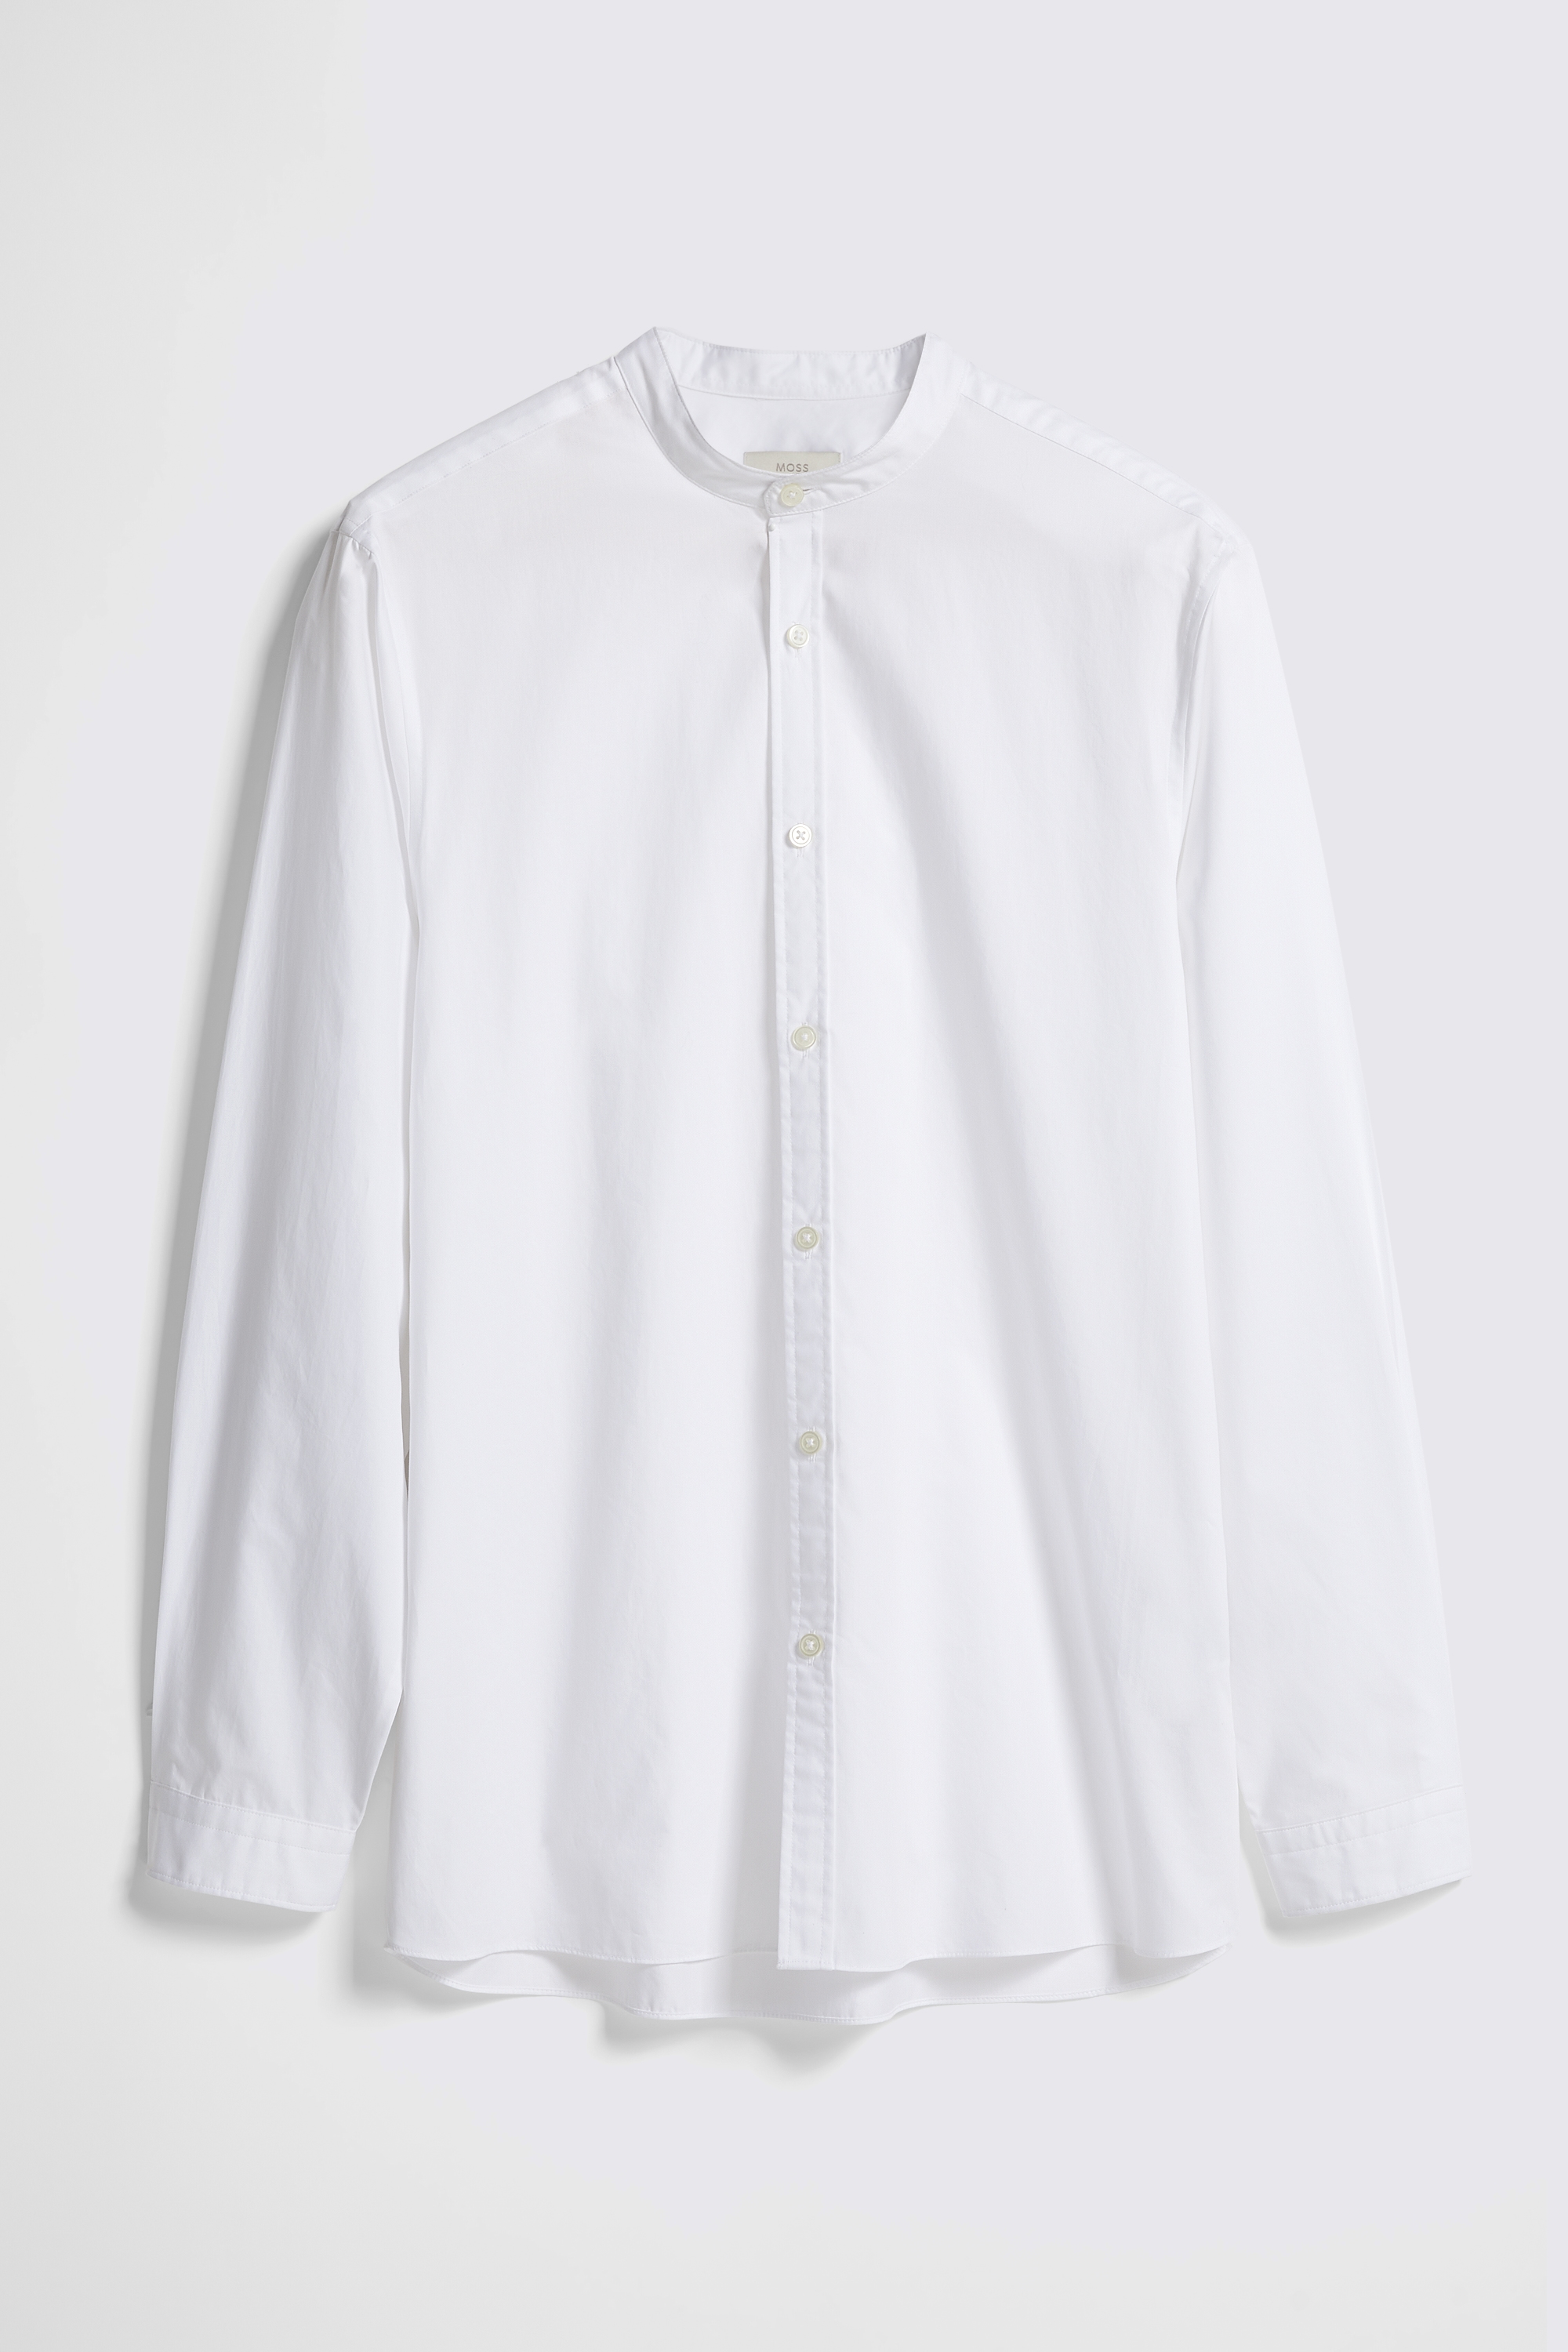 Off White Fine Twill Shirt | Buy Online at Moss